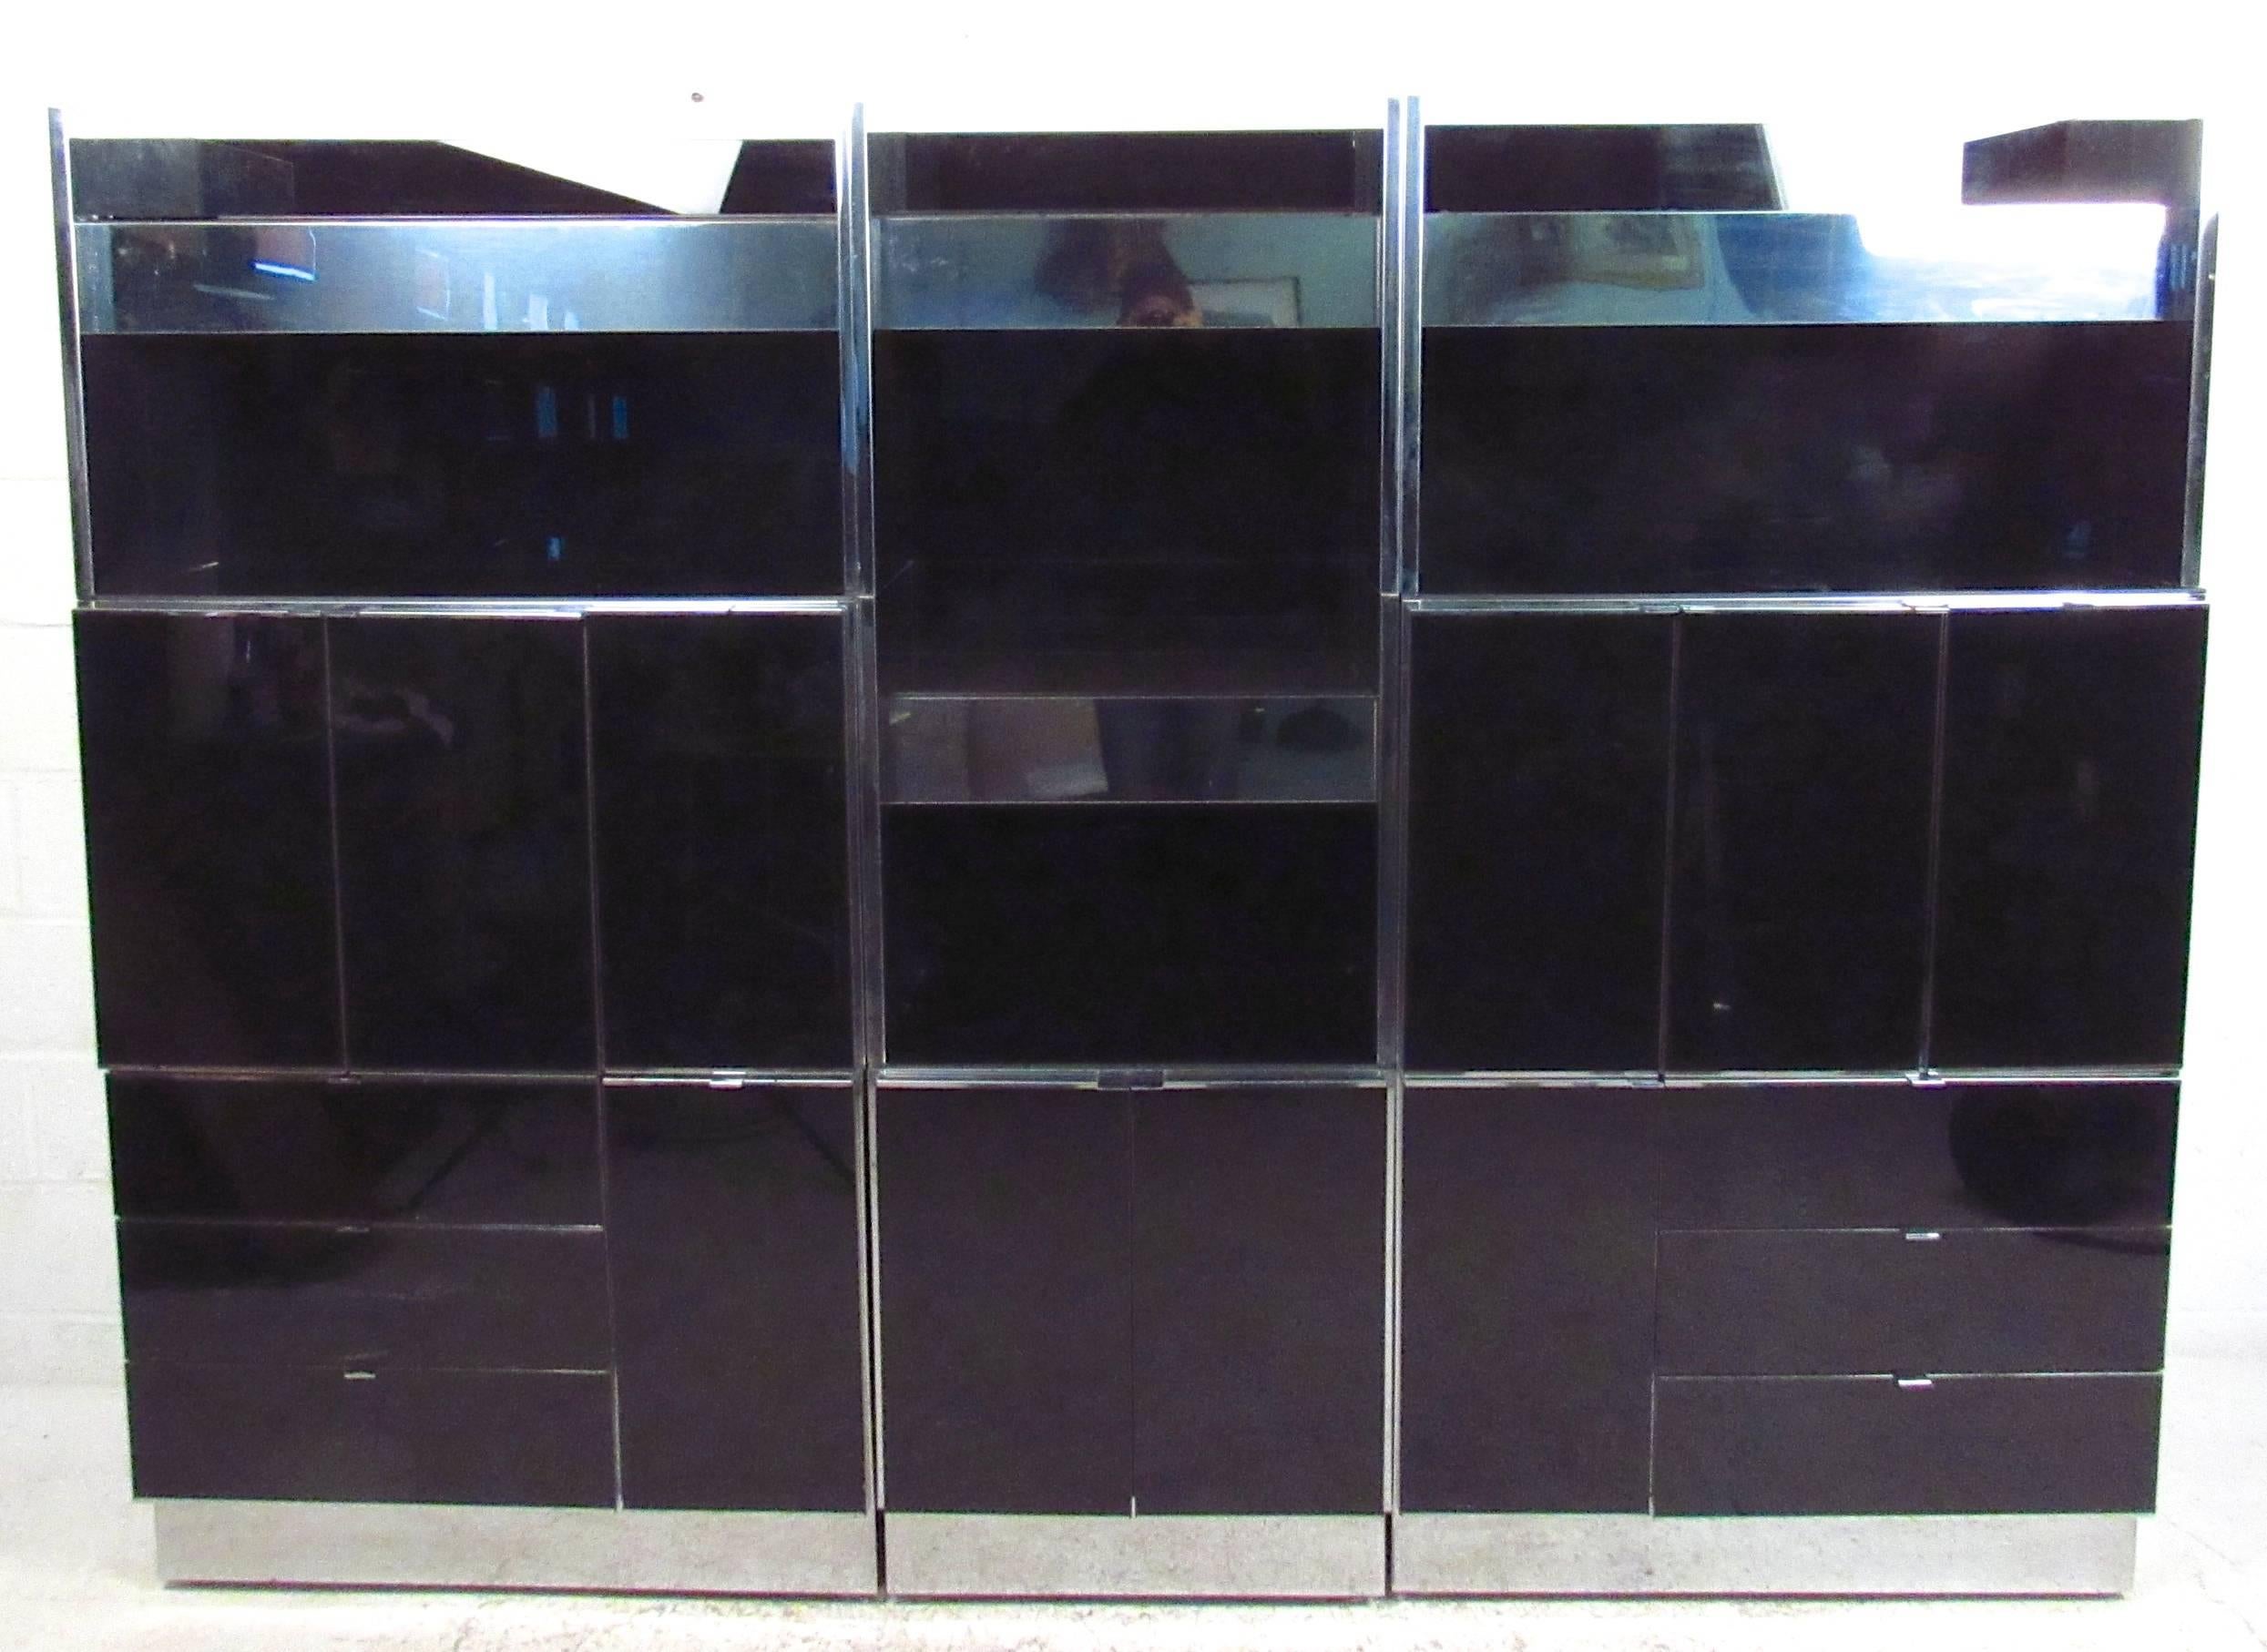 This unique black glass modular unit offers a substantial and spacious storage and display option for a variety of settings. Back lit display shelves, spacious cabinets, and plenty of drawers provide stylish organization options for home or office.